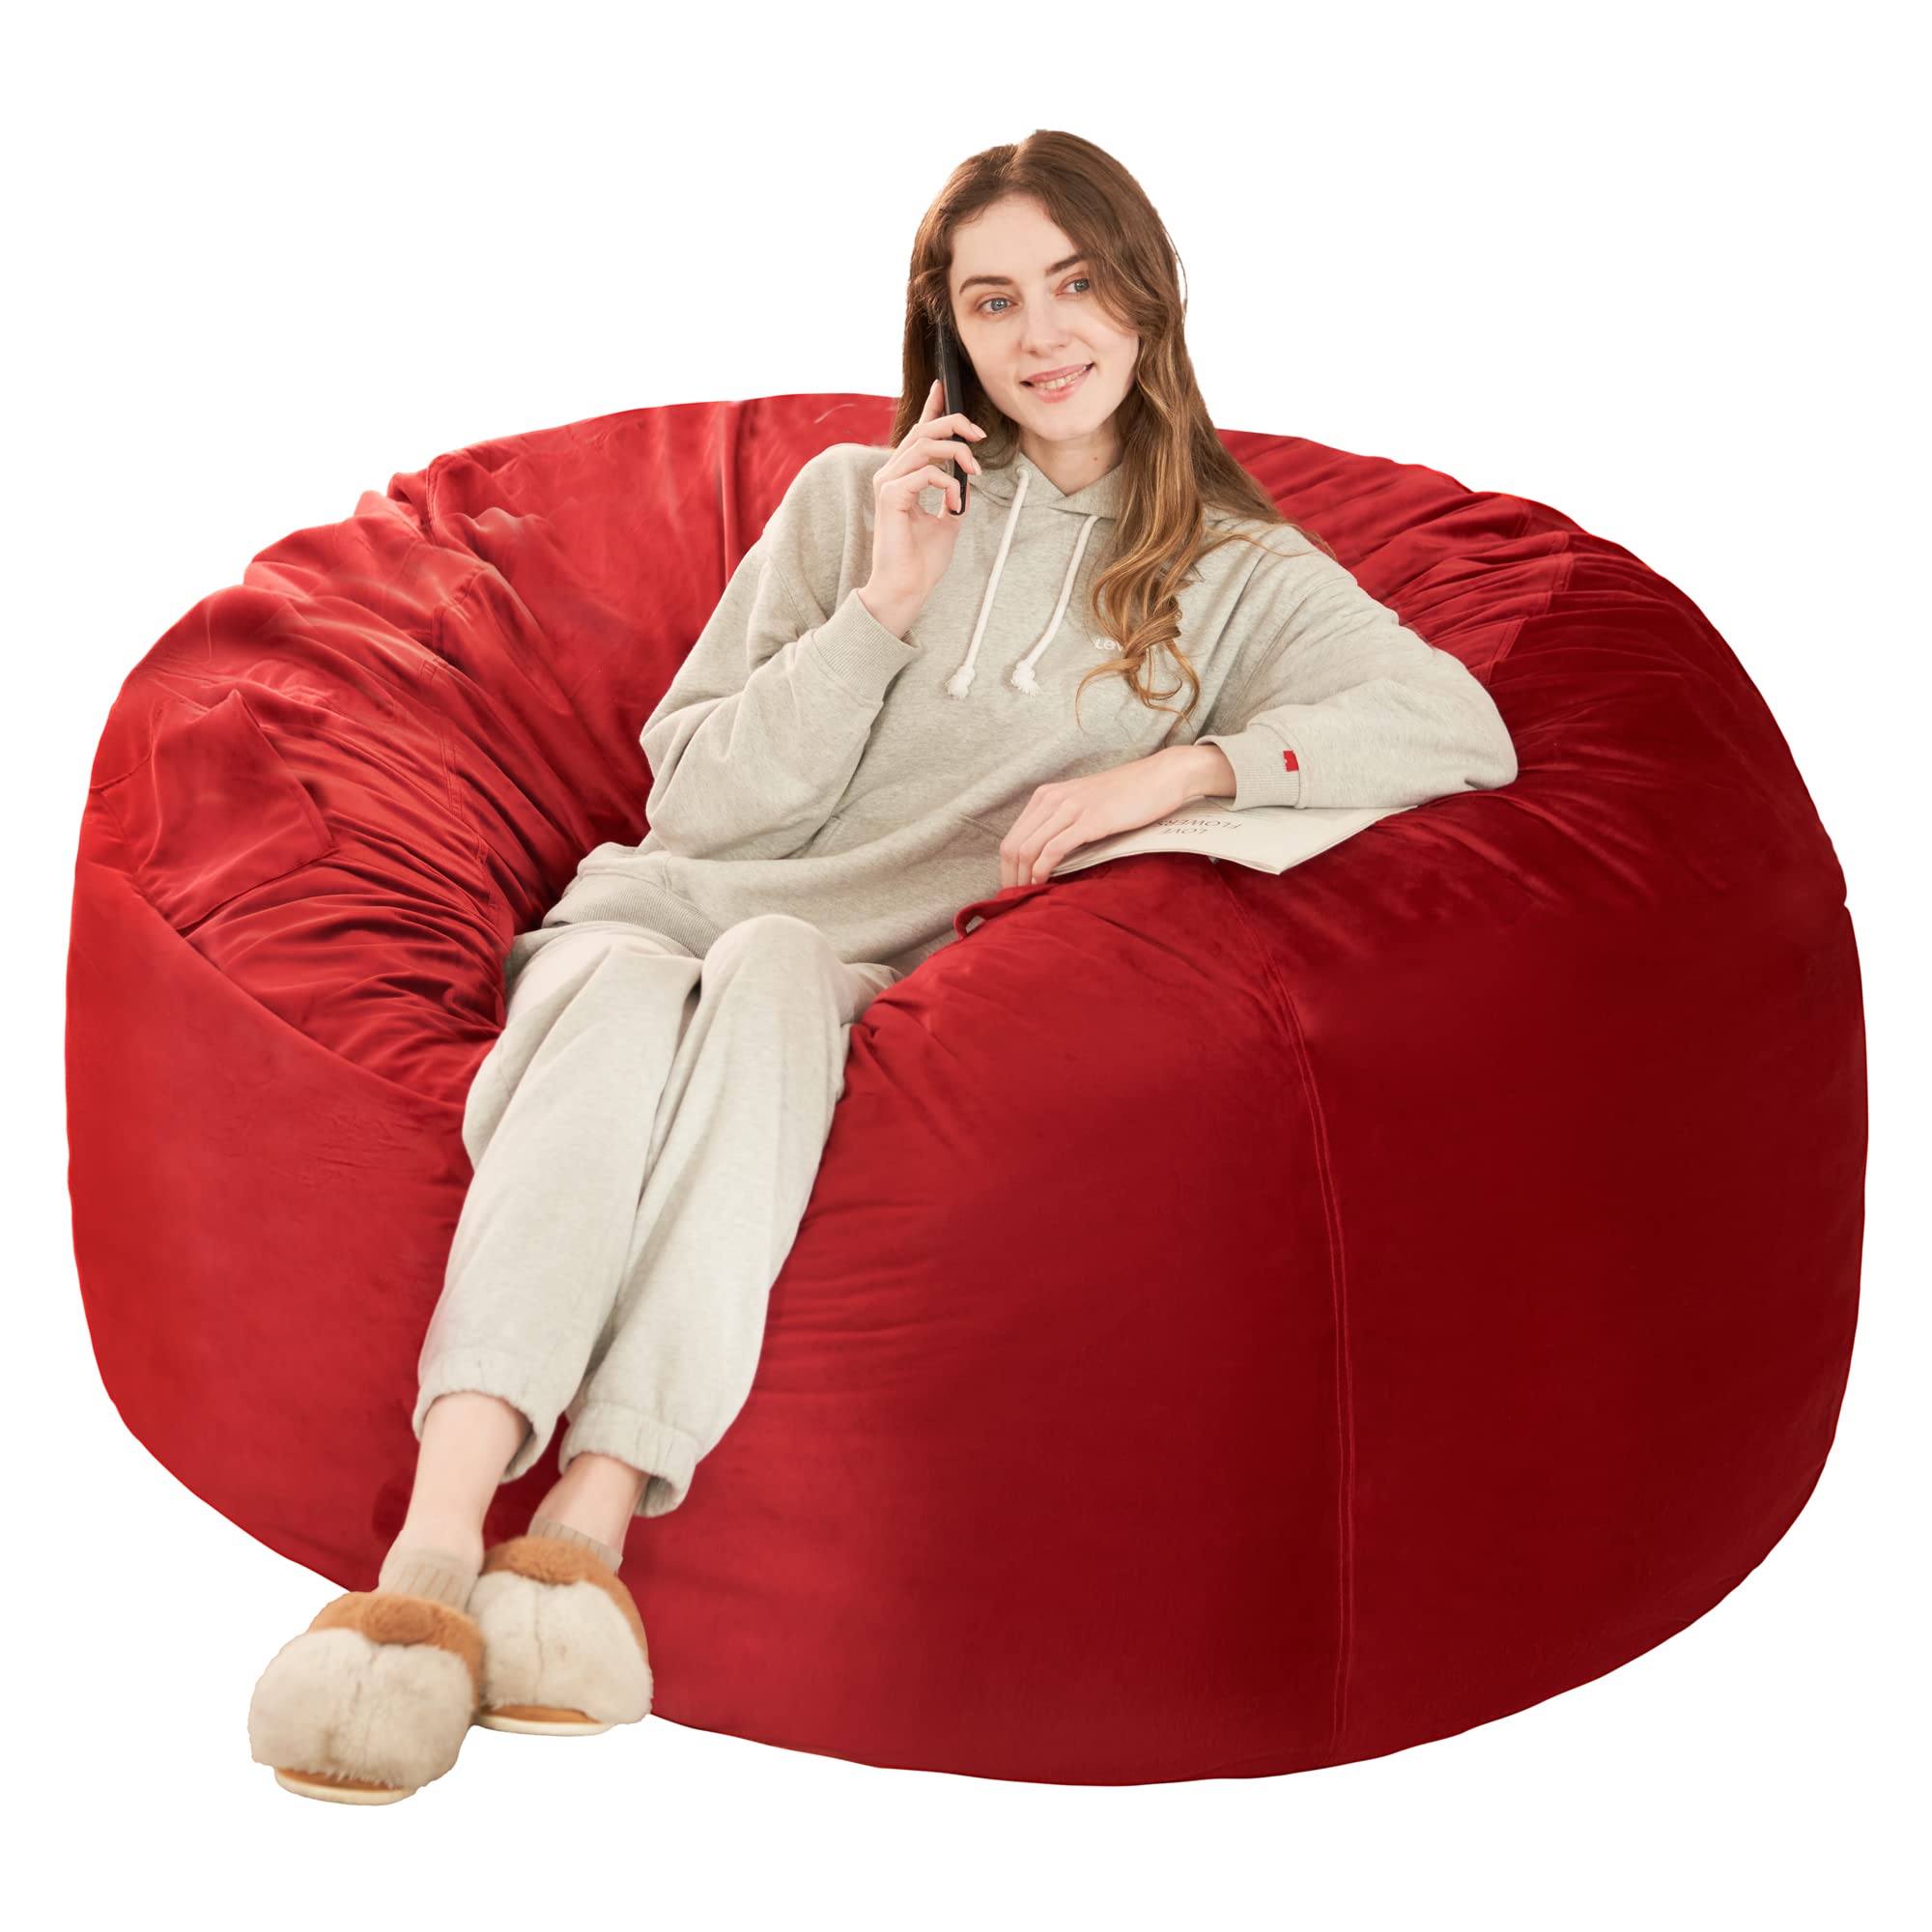 HABUTWAY Bean Bag Chair: Giant 4' Memory Foam Furniture Bean Bag Chairs for Adults with Microfiber Cover - 4Ft, Red